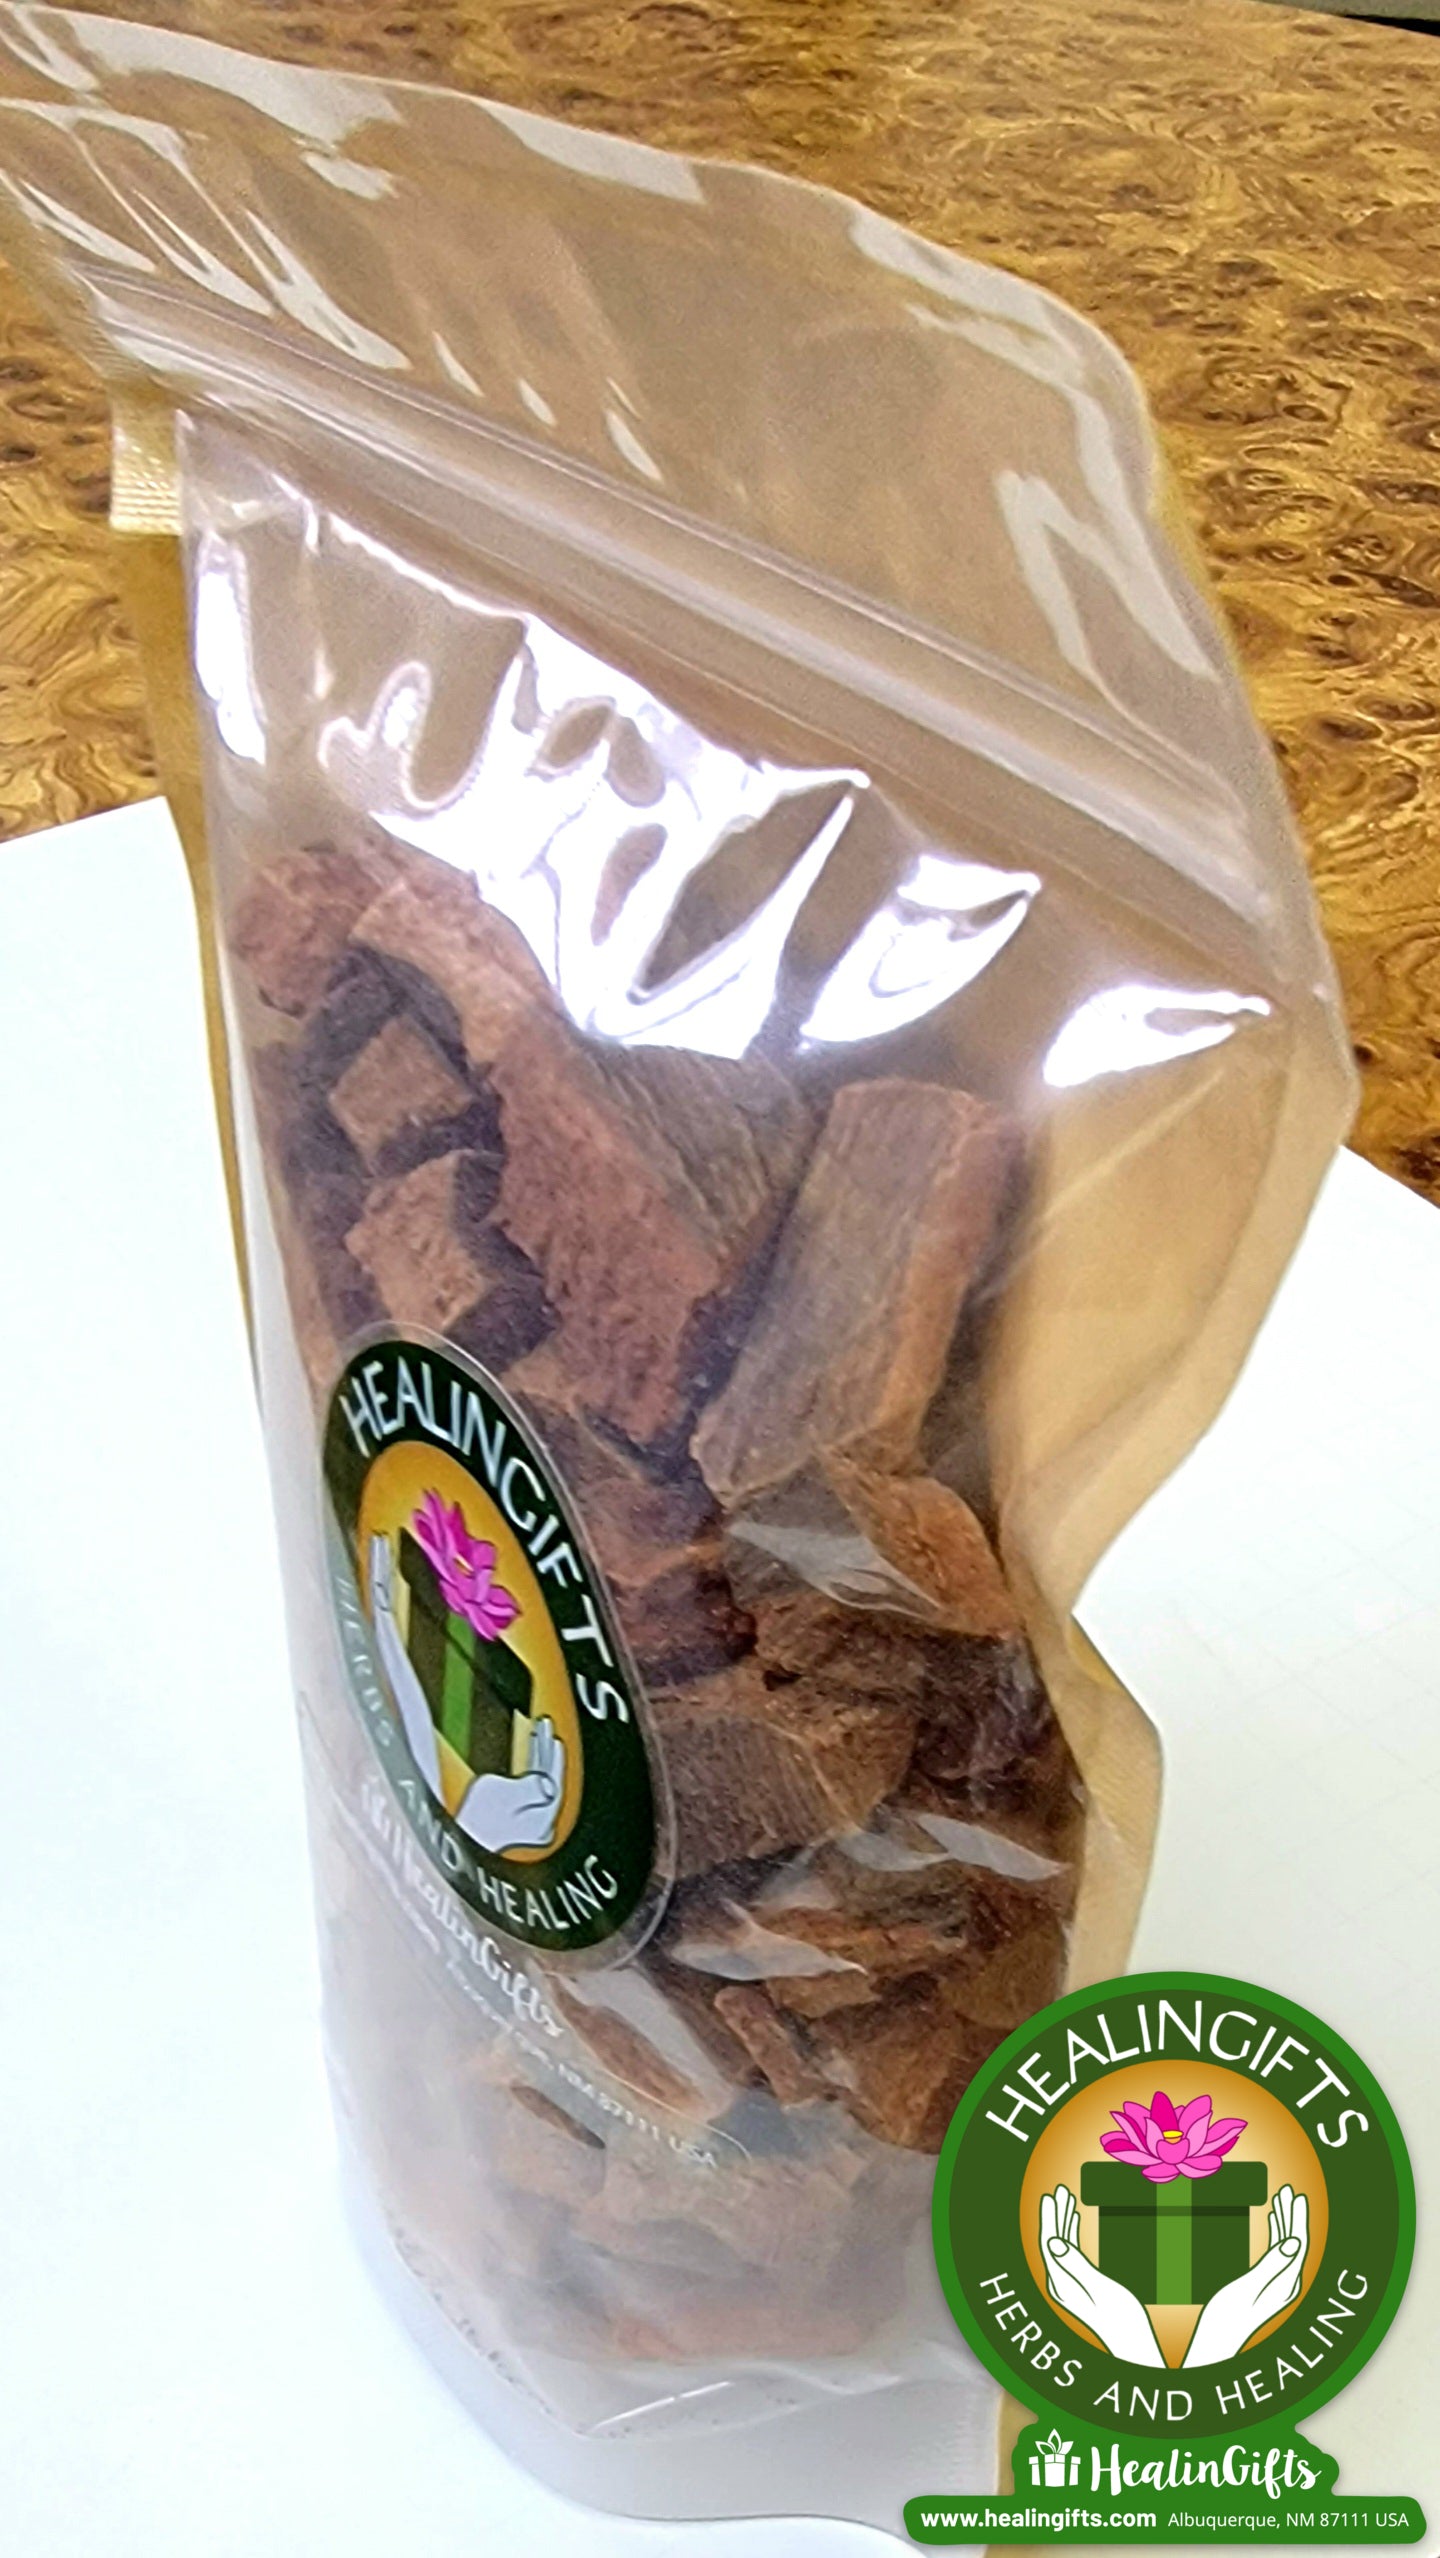 Cinchona Bark Quina Roja hardwood chips sourced from Mexico